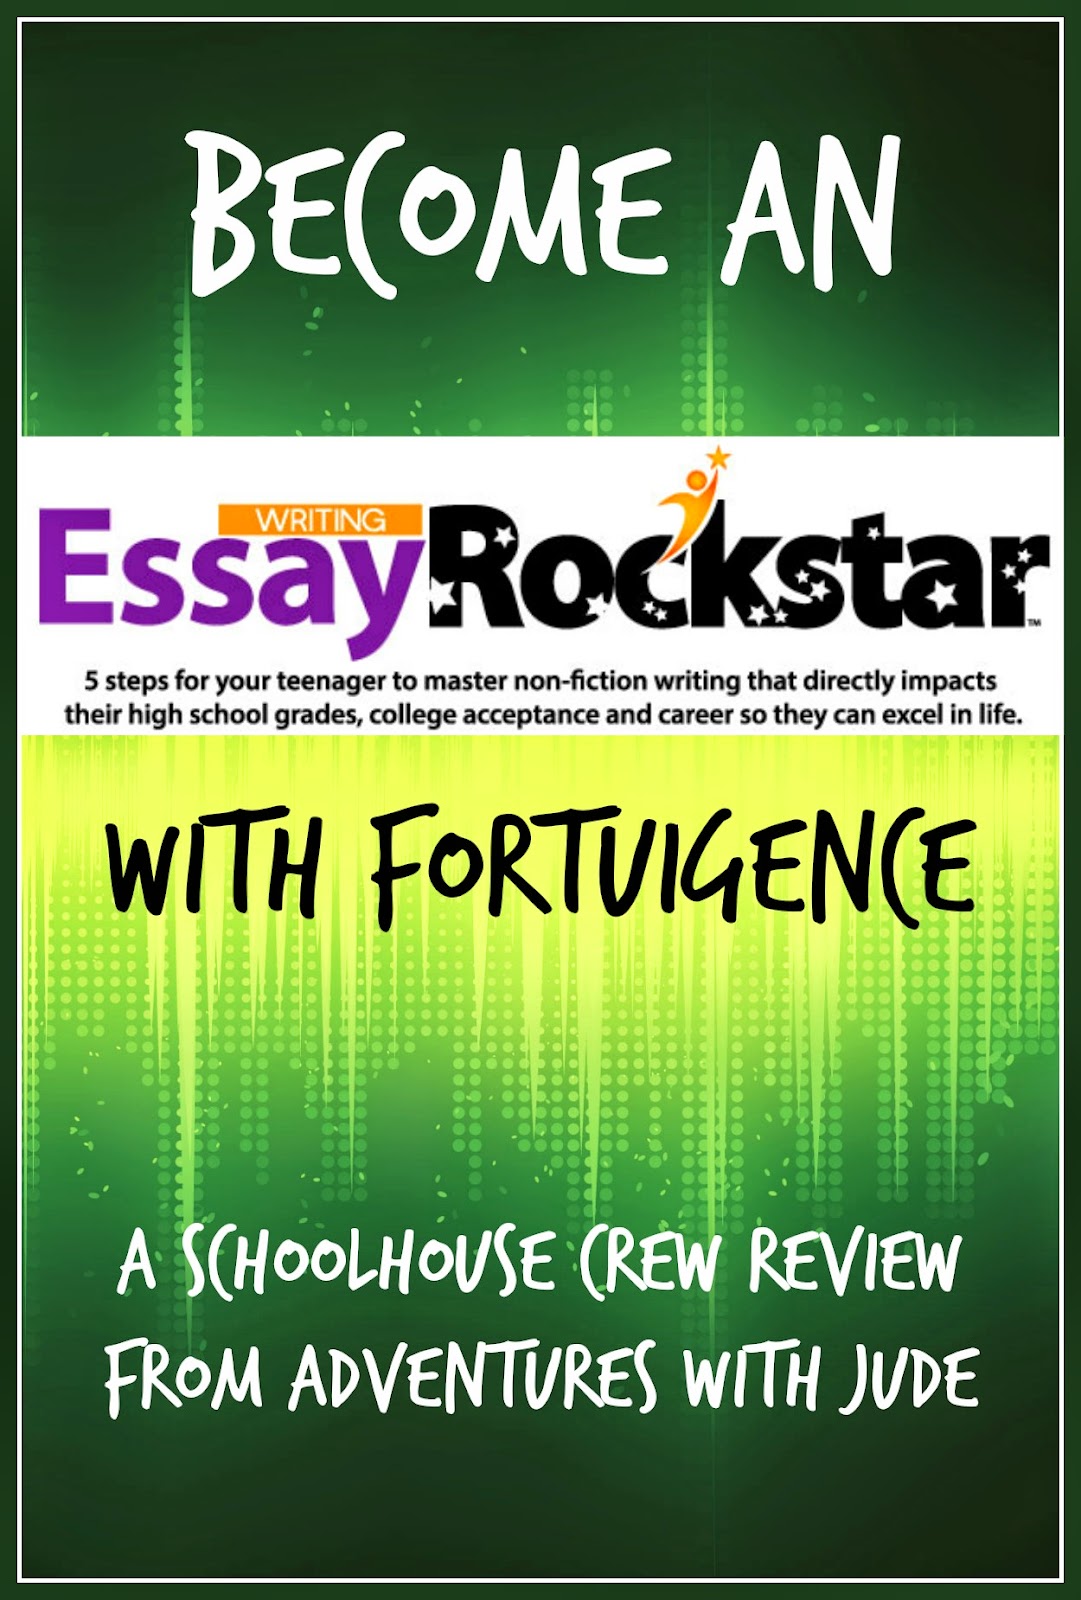 Review of Fortuigence's Essay Rock Star